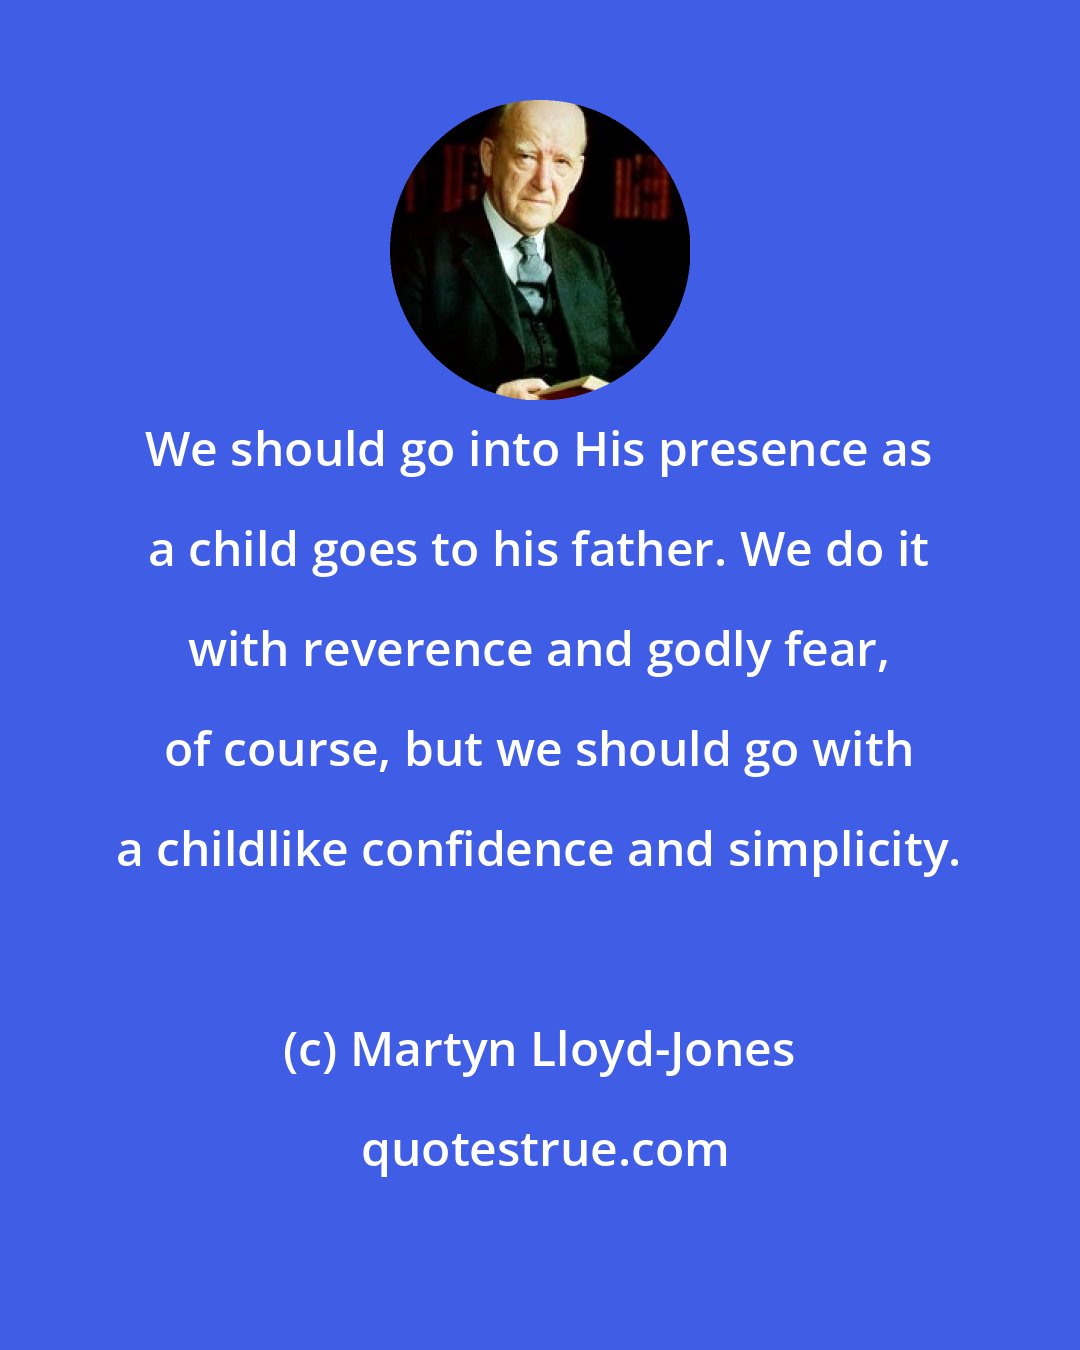 Martyn Lloyd-Jones: We should go into His presence as a child goes to his father. We do it with reverence and godly fear, of course, but we should go with a childlike confidence and simplicity.